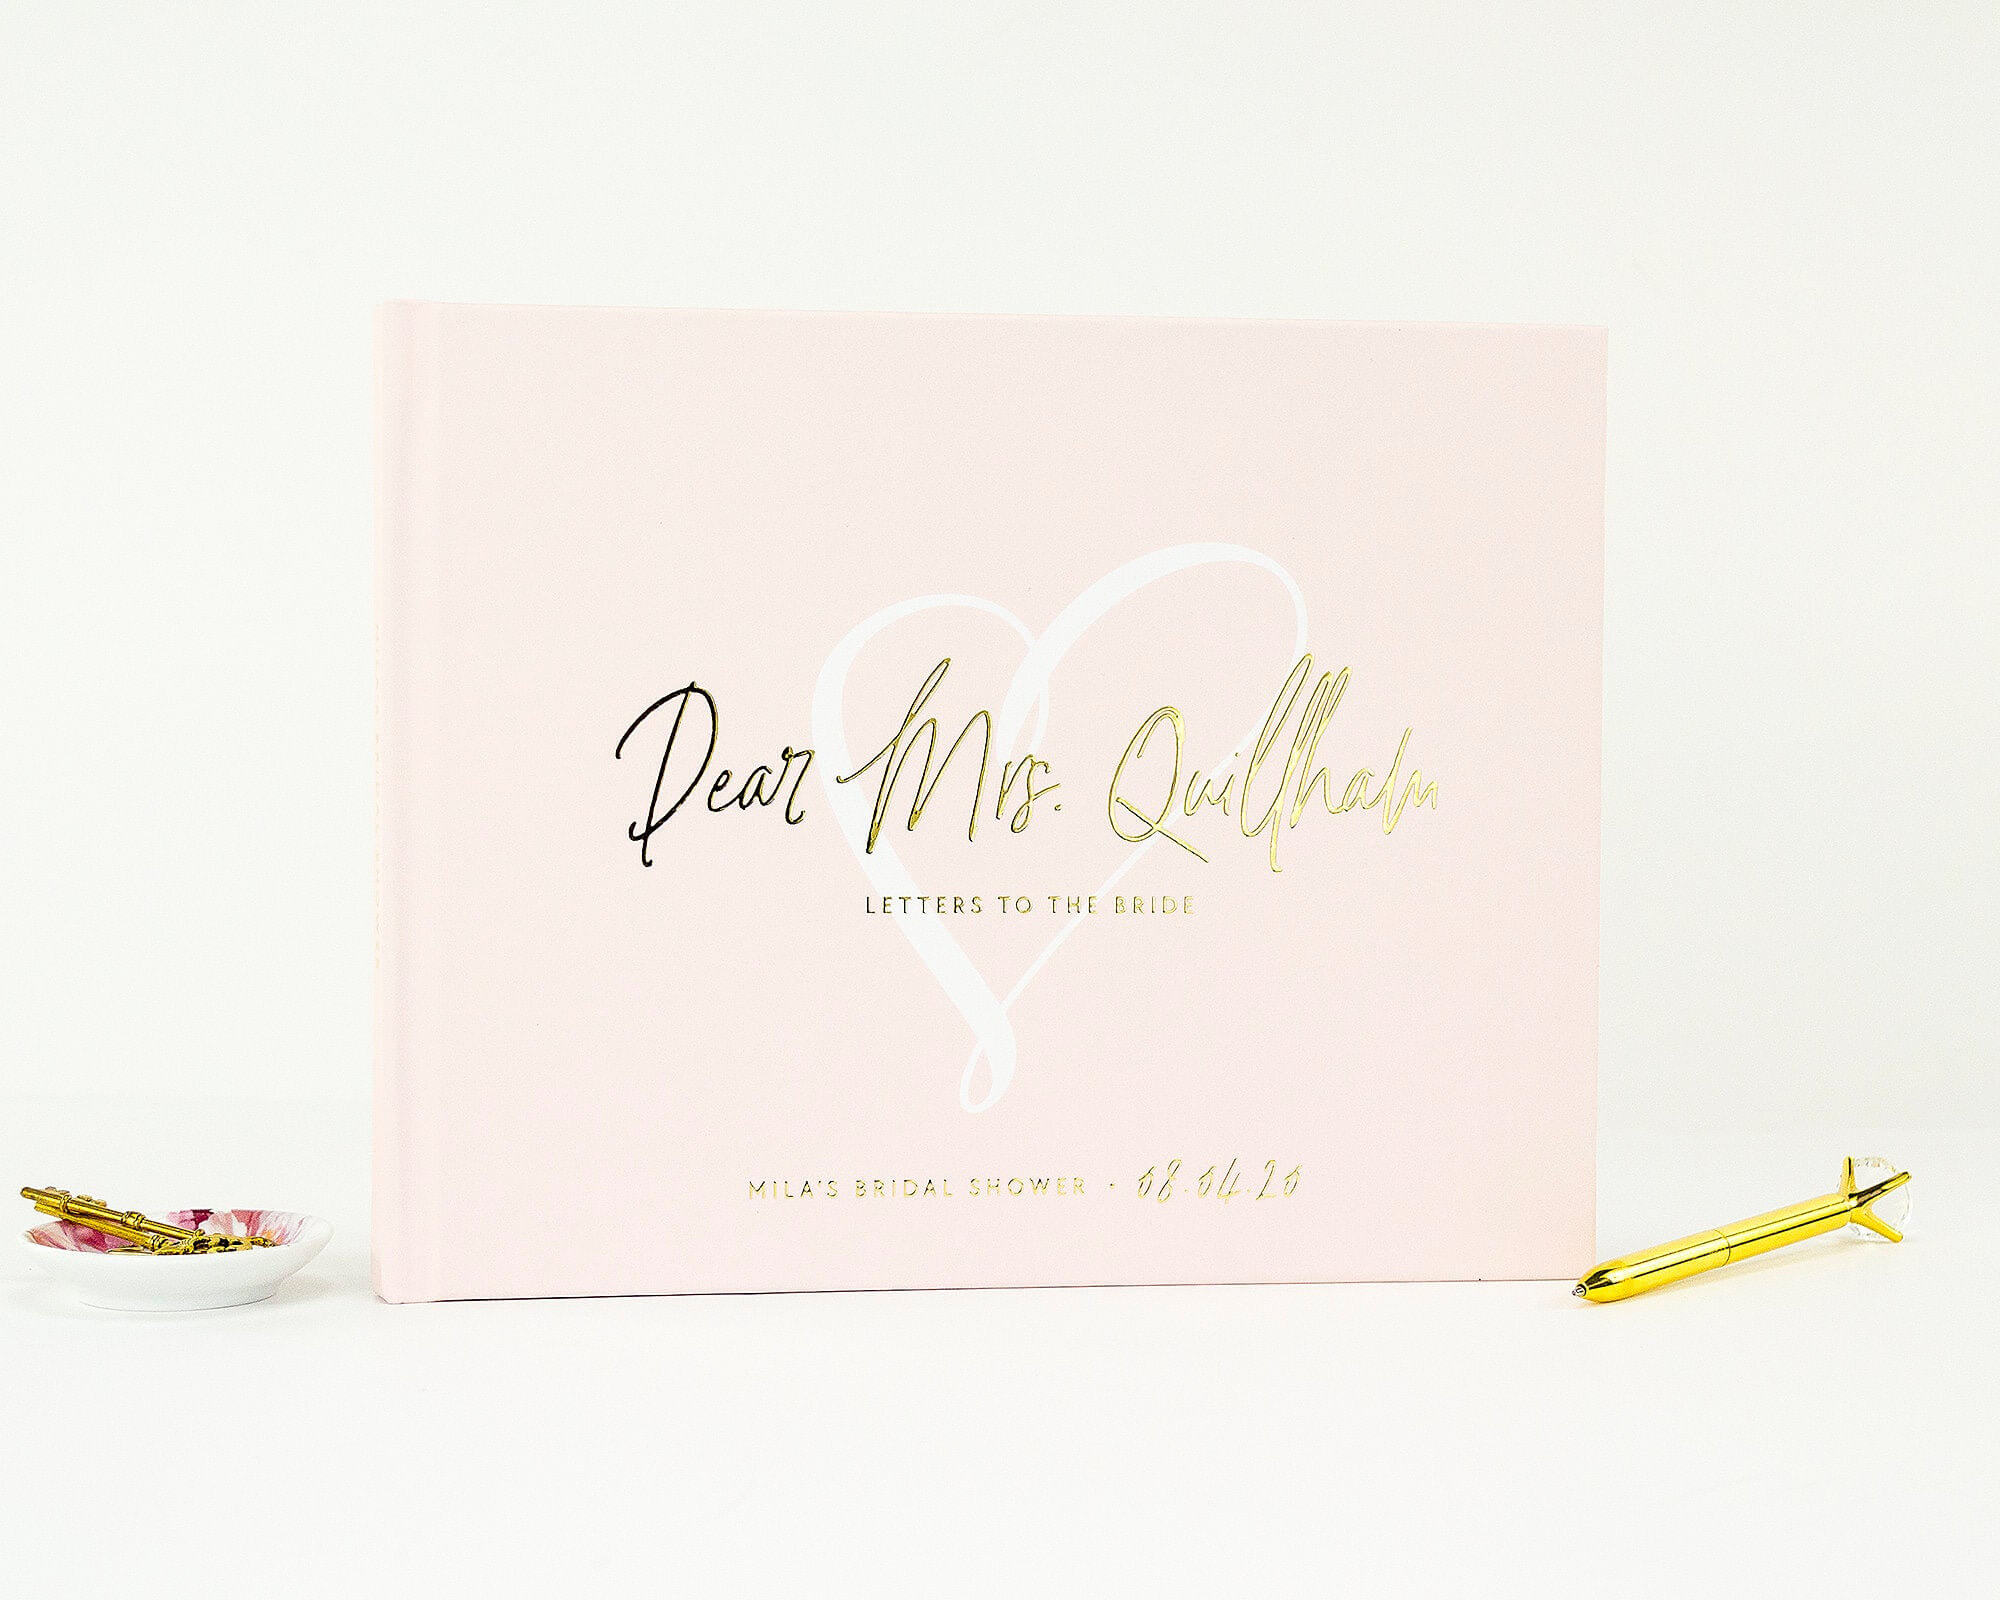 Letters to the Bride: How to Make a Letters to the Bride Book